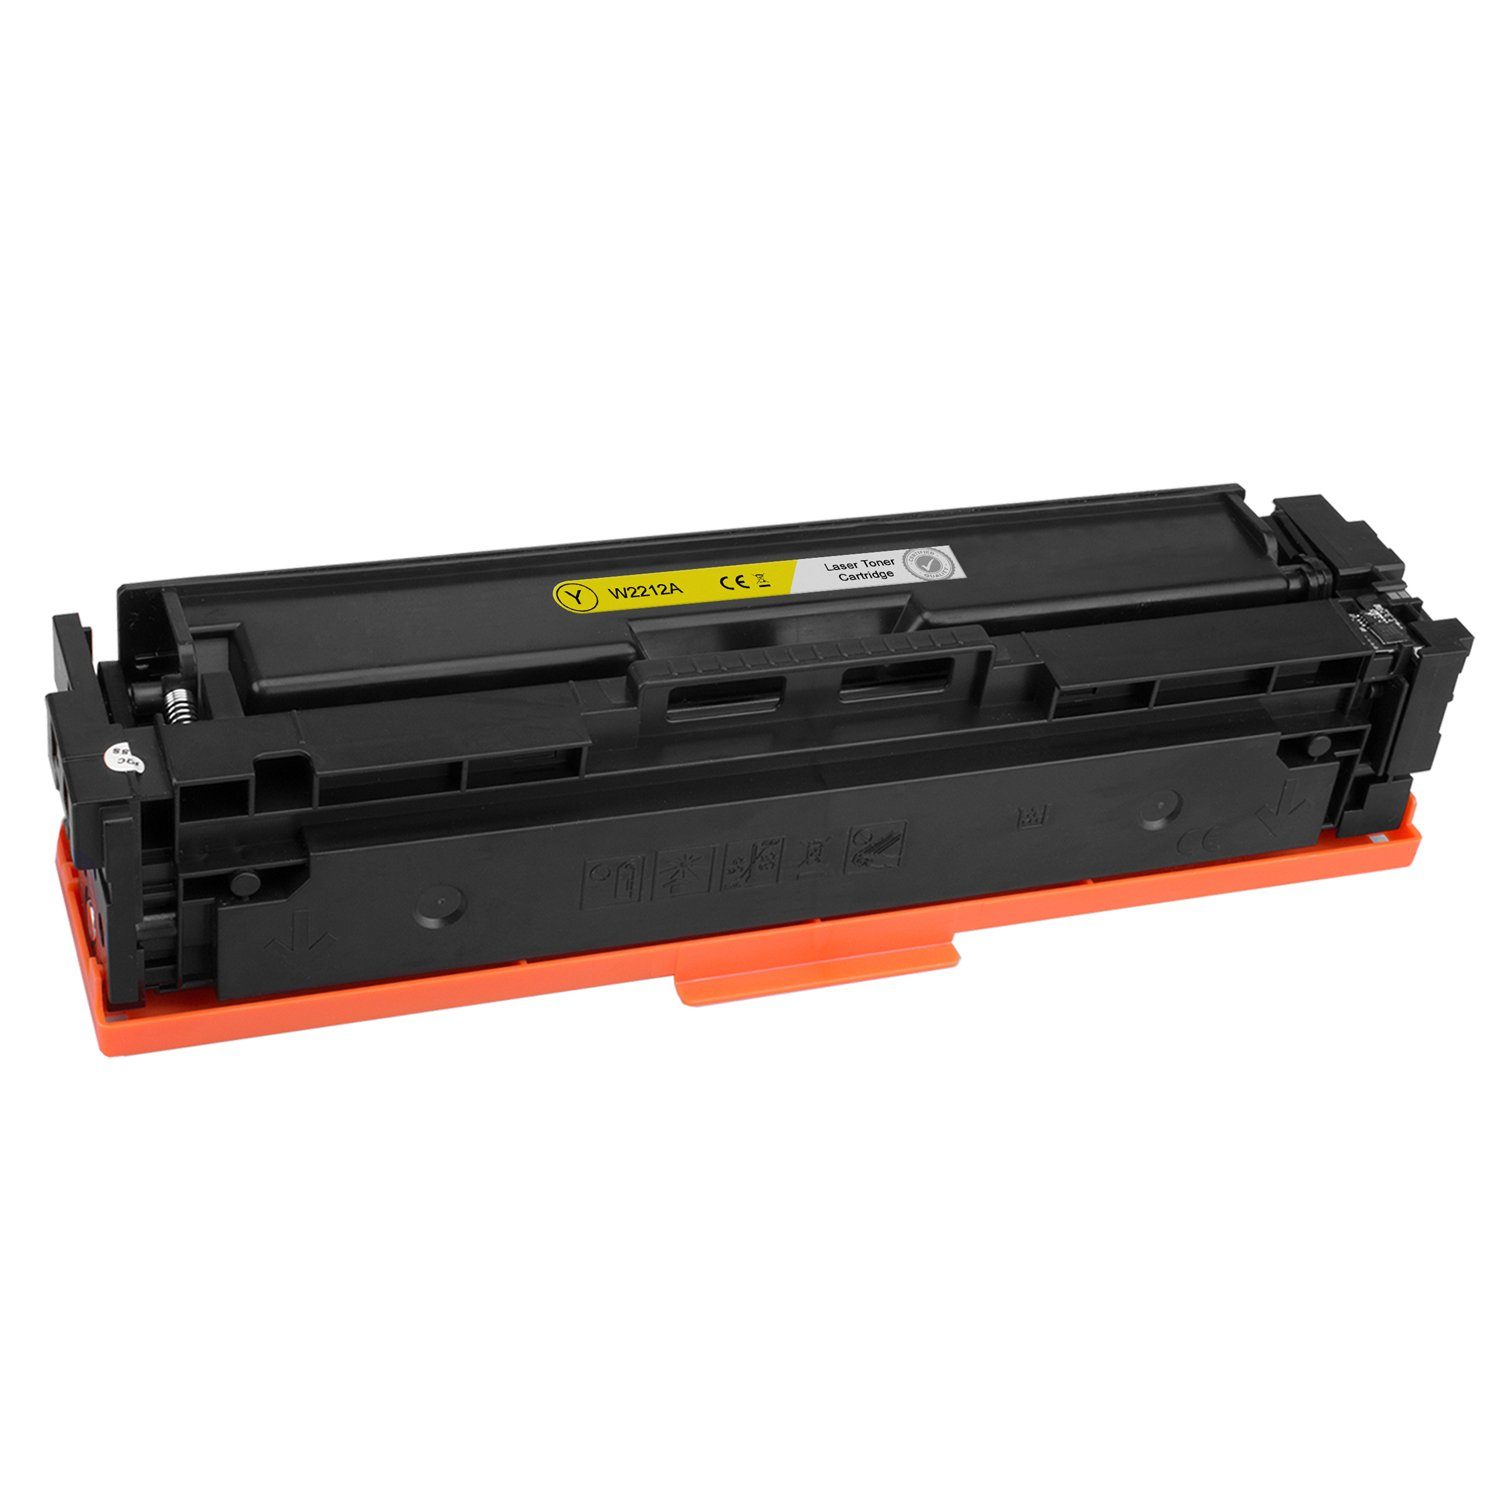 Tito-Express Tonerpatrone ersetzt HP W2212 Laserjet M255dw M283fdn (1x für W HP Yellow), 2212 A HPW2212A, Pro M255nw A M283fdw MFP Color M282nw